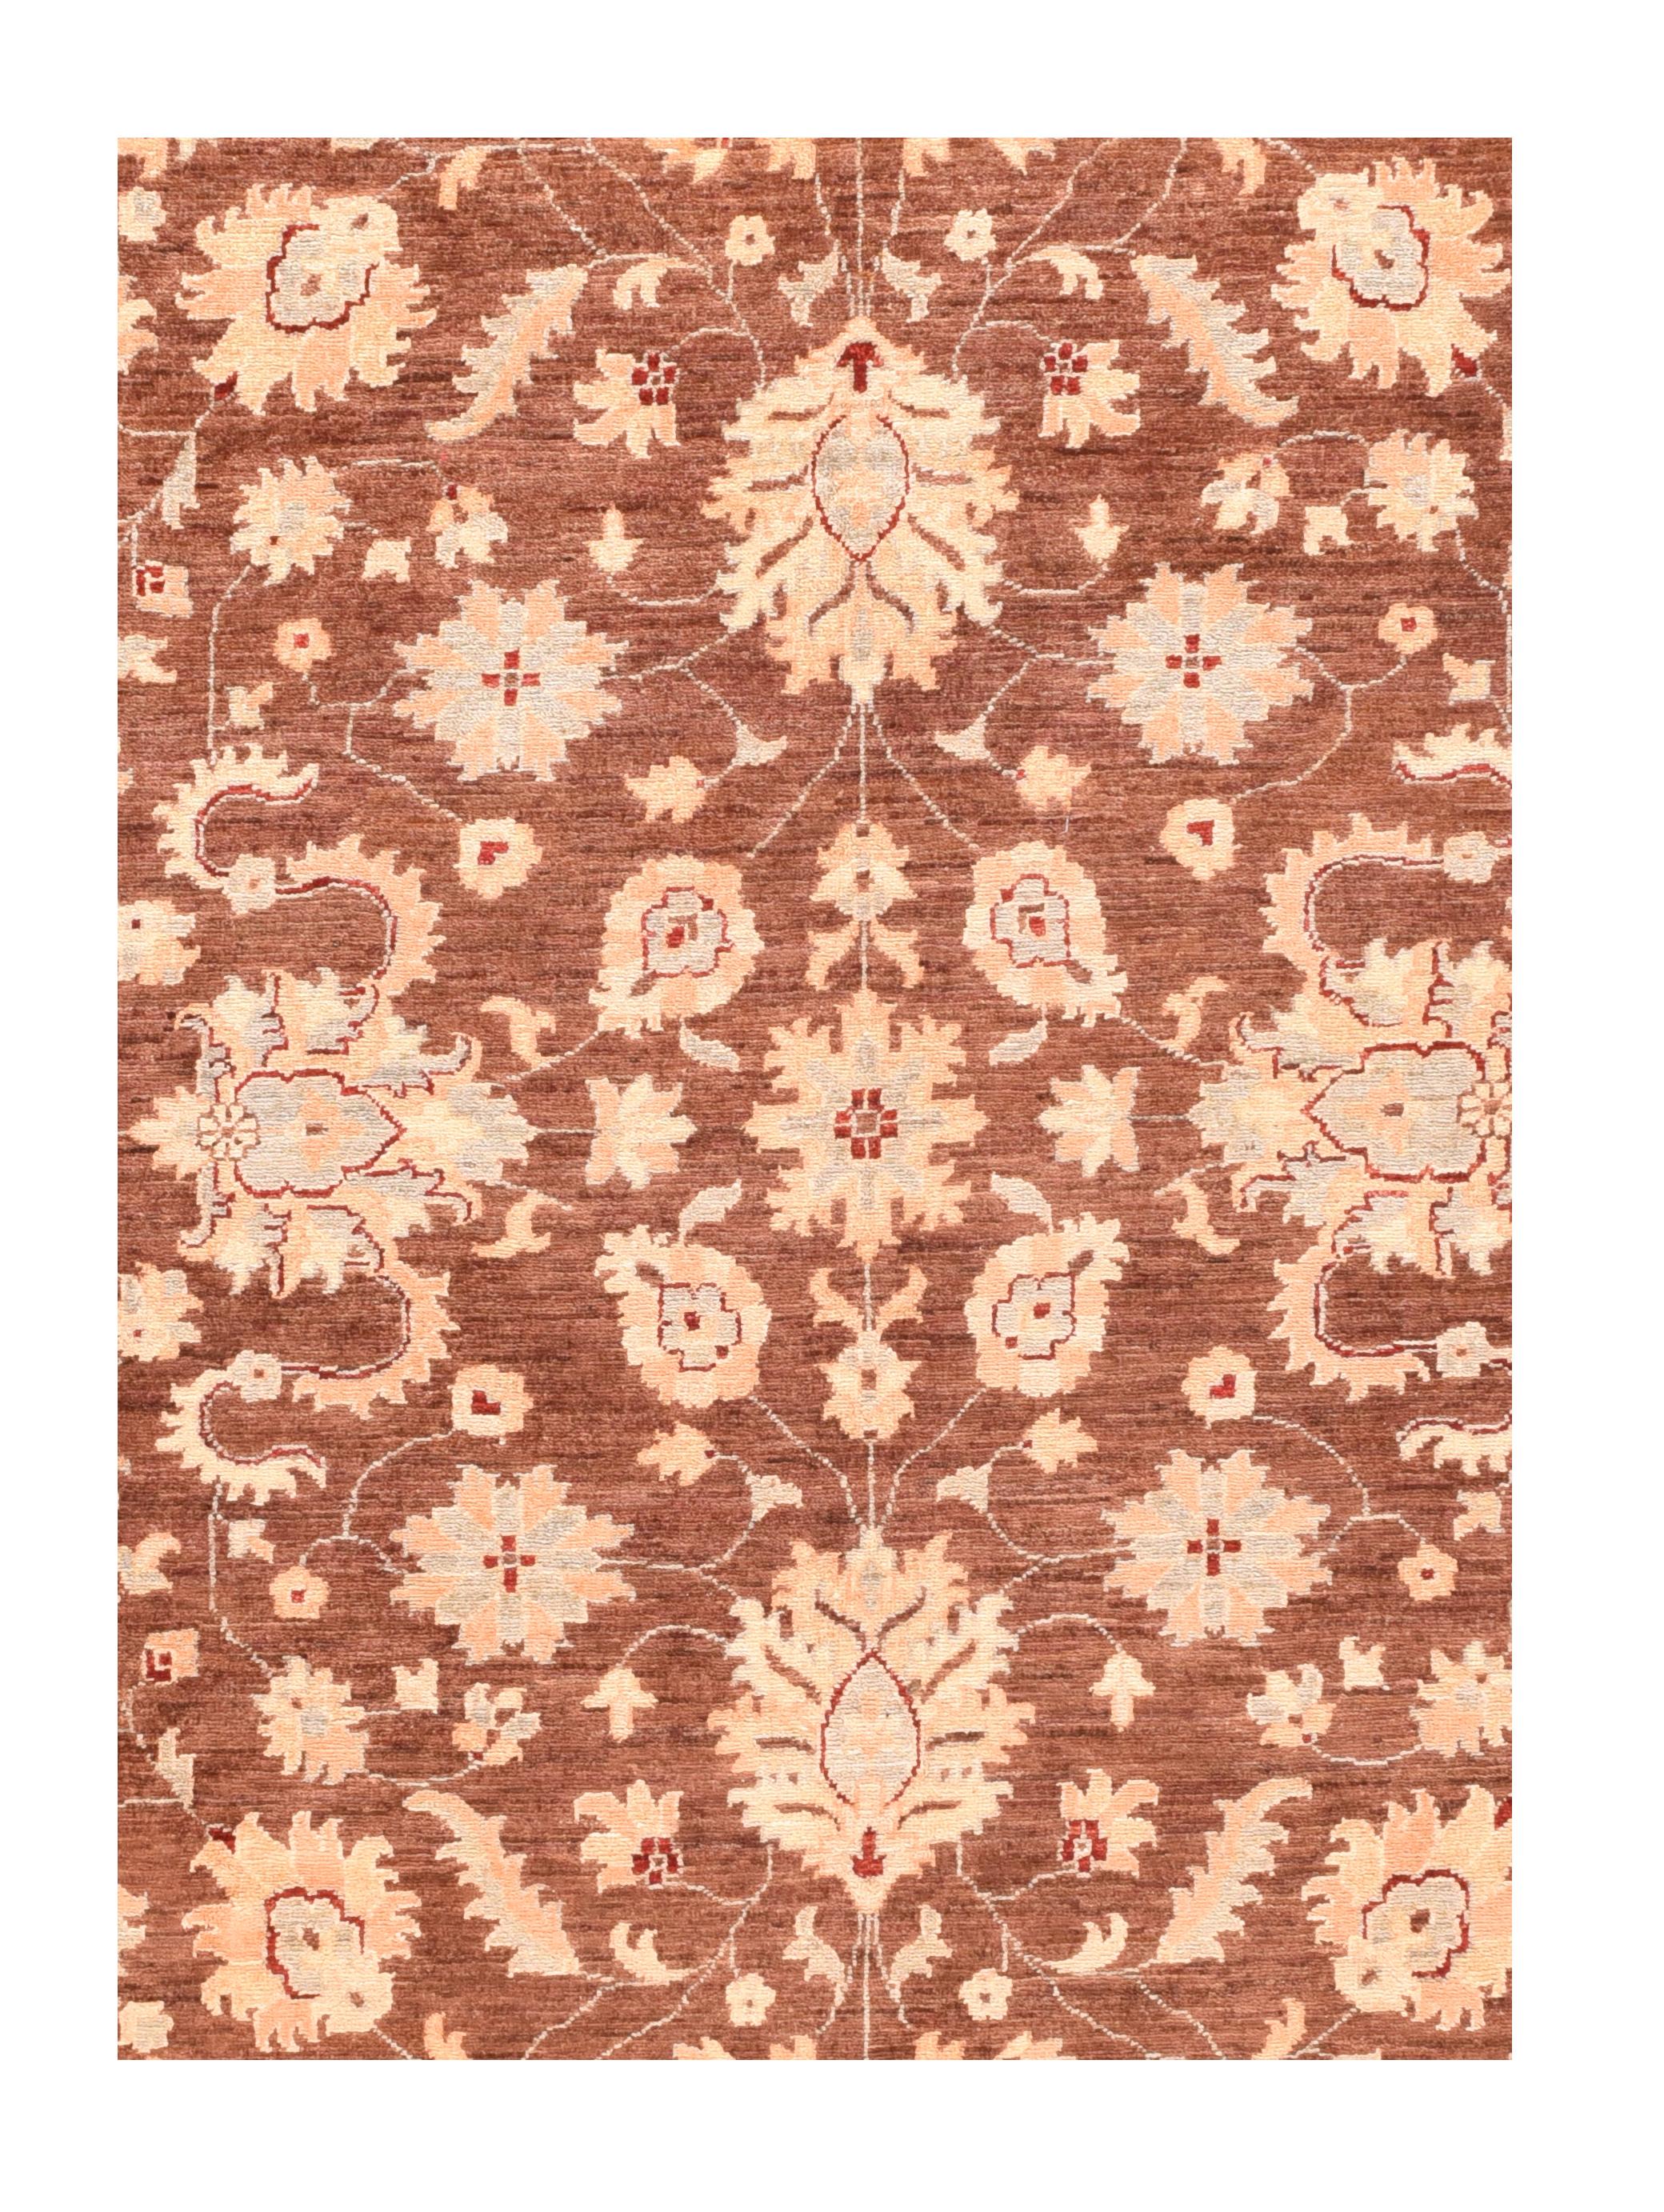 Fine Peshawar Pakistan rug, hand knotted
Design: Floral

Peshawar is the capital of the Pakistani province of Khyber Pakhtunkhwa. Situated in the broad Valley of Peshawar near the eastern end of the historic Khyber Pass, close to the border with